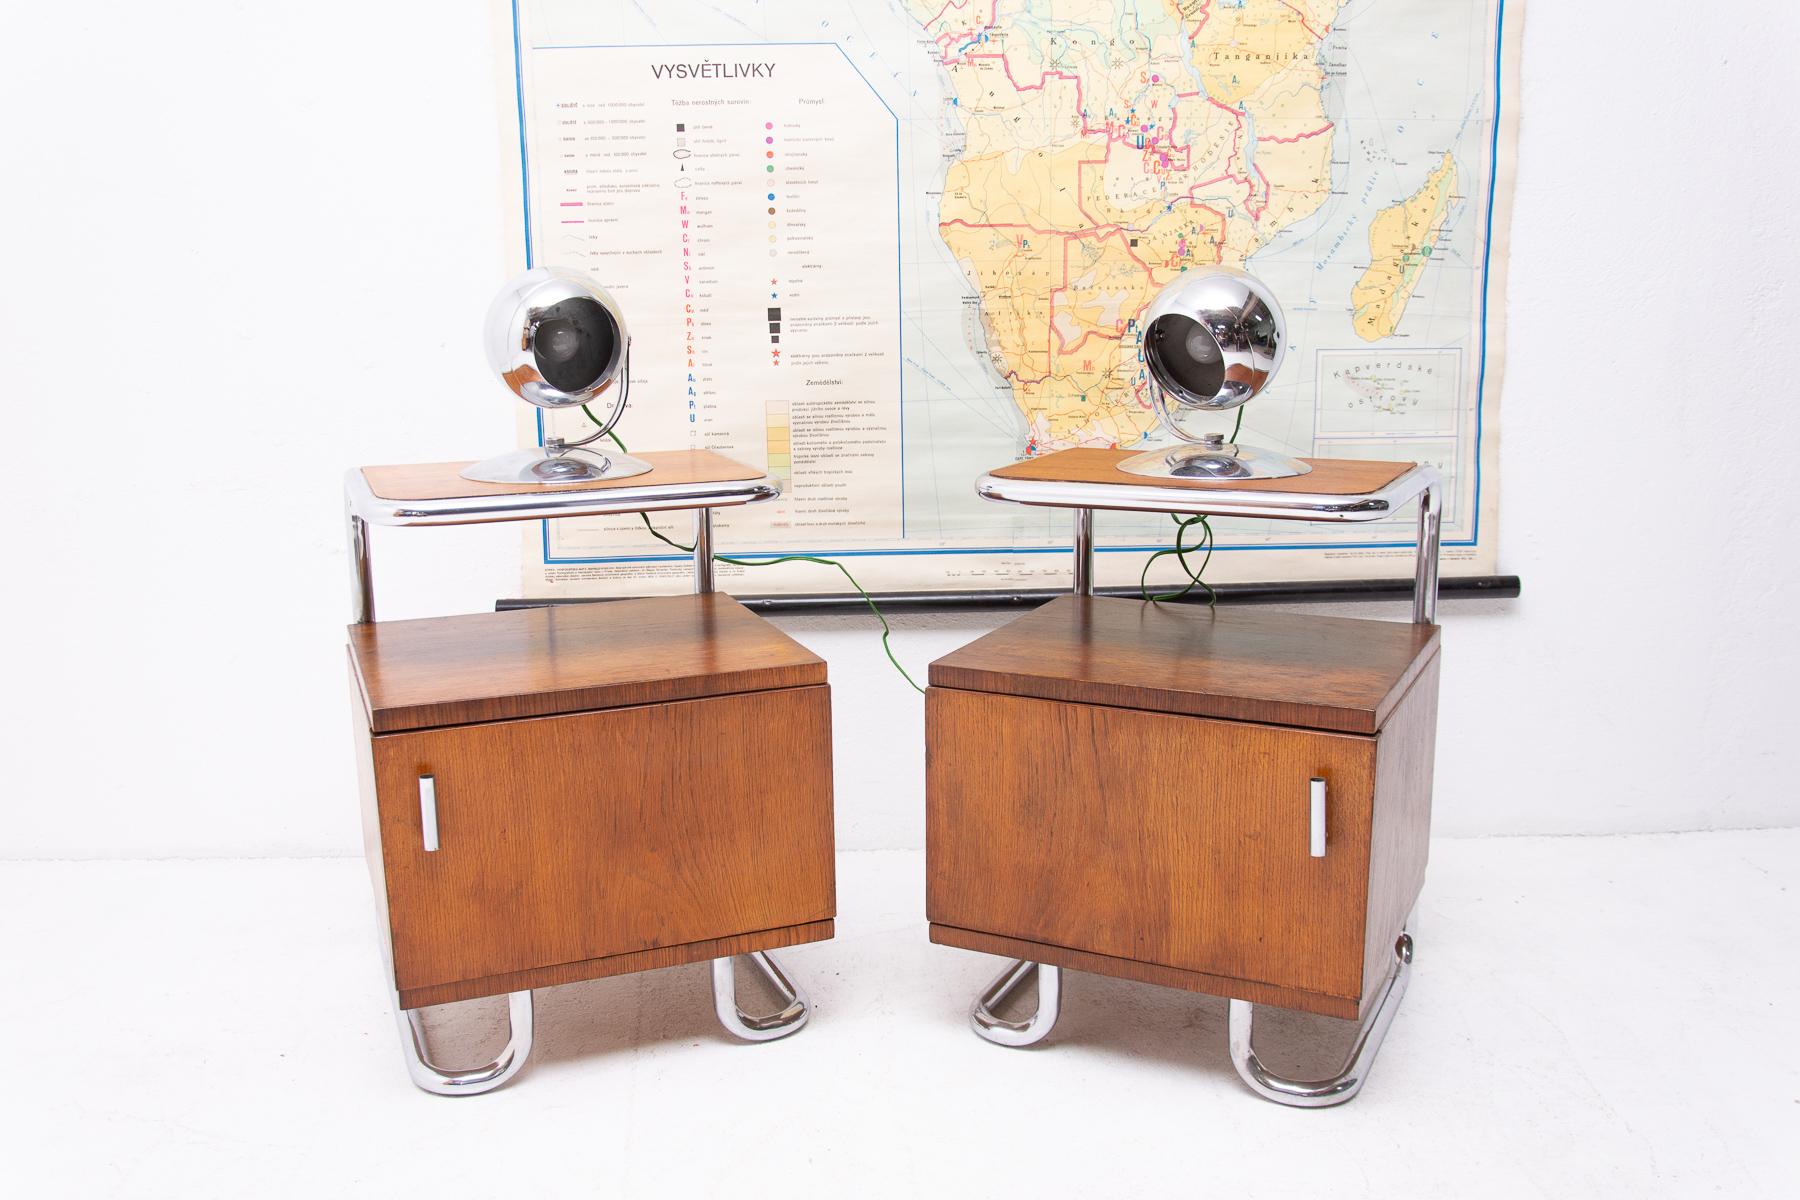 A pair of modernist nightstands in the Bauhaus style. Outstanding timeless design. Made in the former Czechoslovakia in the 1950s. It was produced by Kovona Company. A typical example of the Bauhaus period in Central Europe. Chrome is in very good